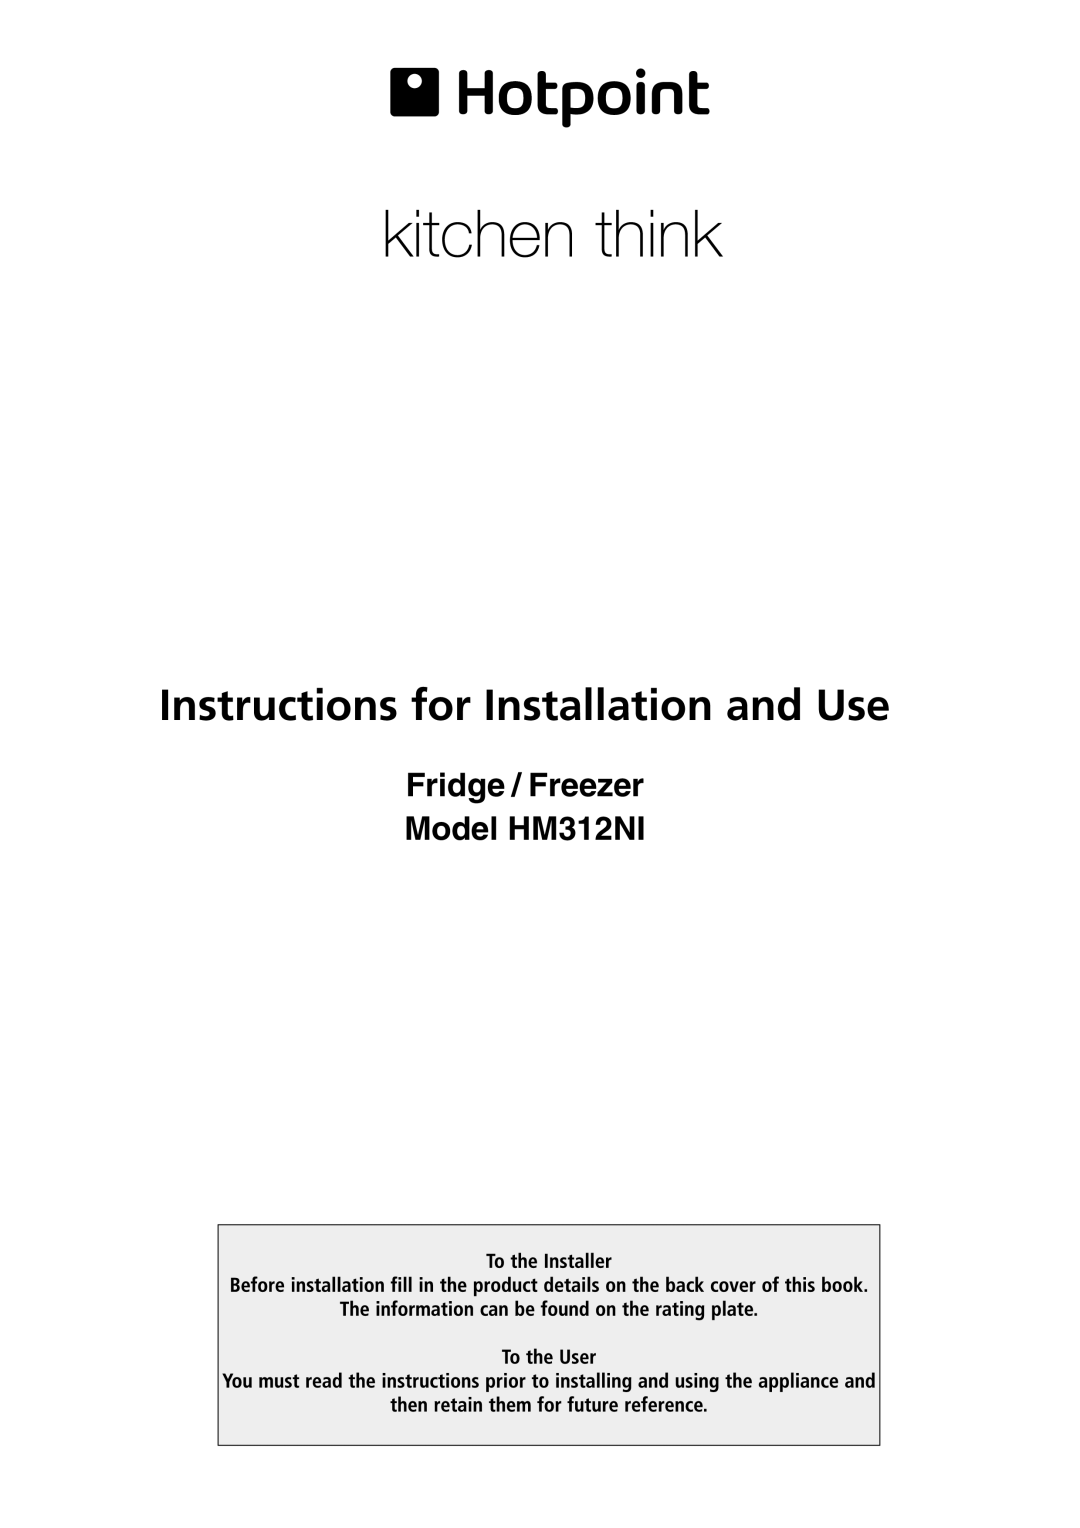 Hotpoint manual Fridge / Freezer Model HM312NI, Instructions for Installation and Use 